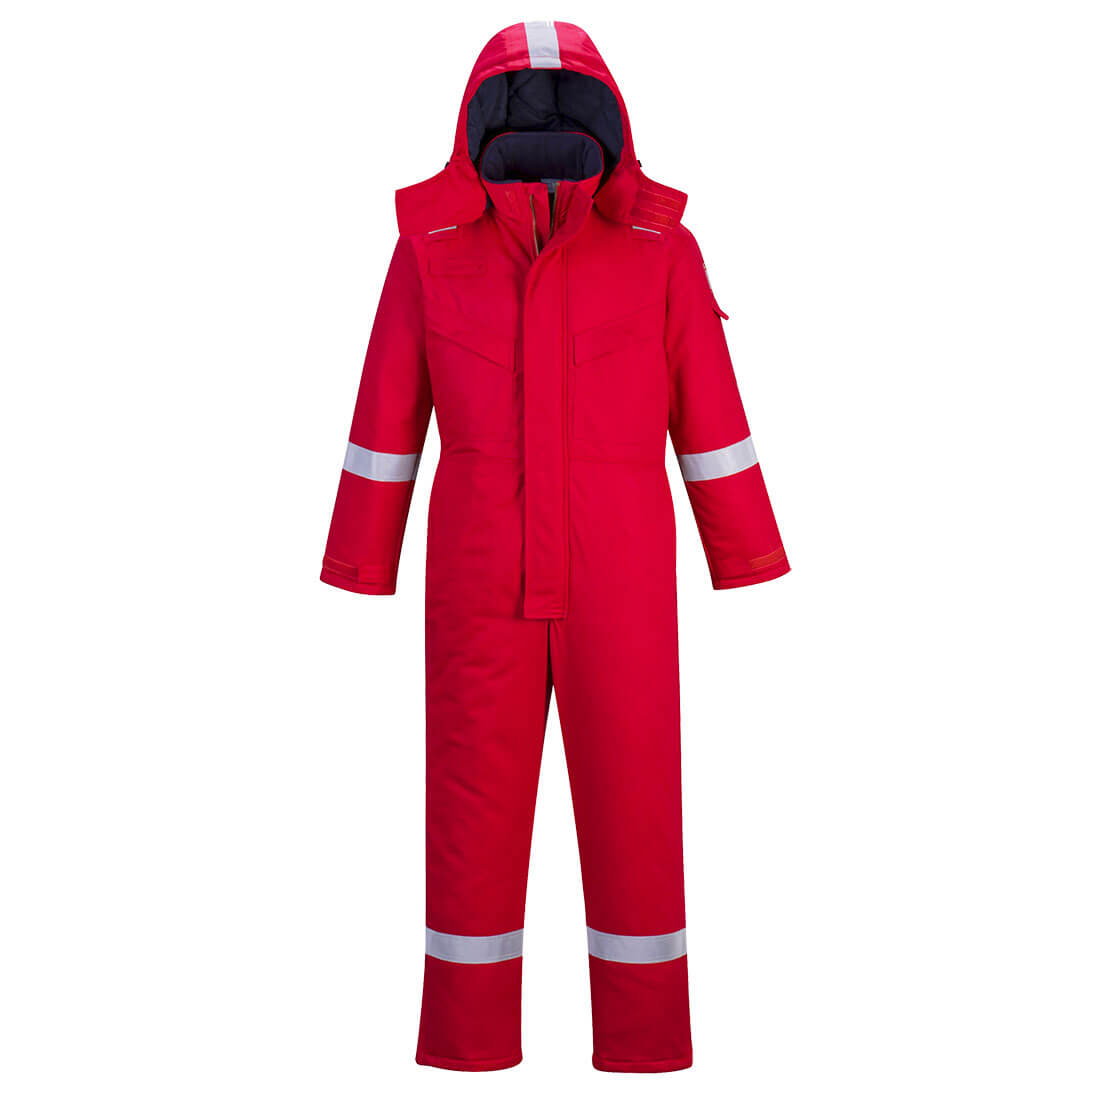 Image of Biz Flame Mens Flame Resistant Antistatic Winter Overall Red 3XL 32"